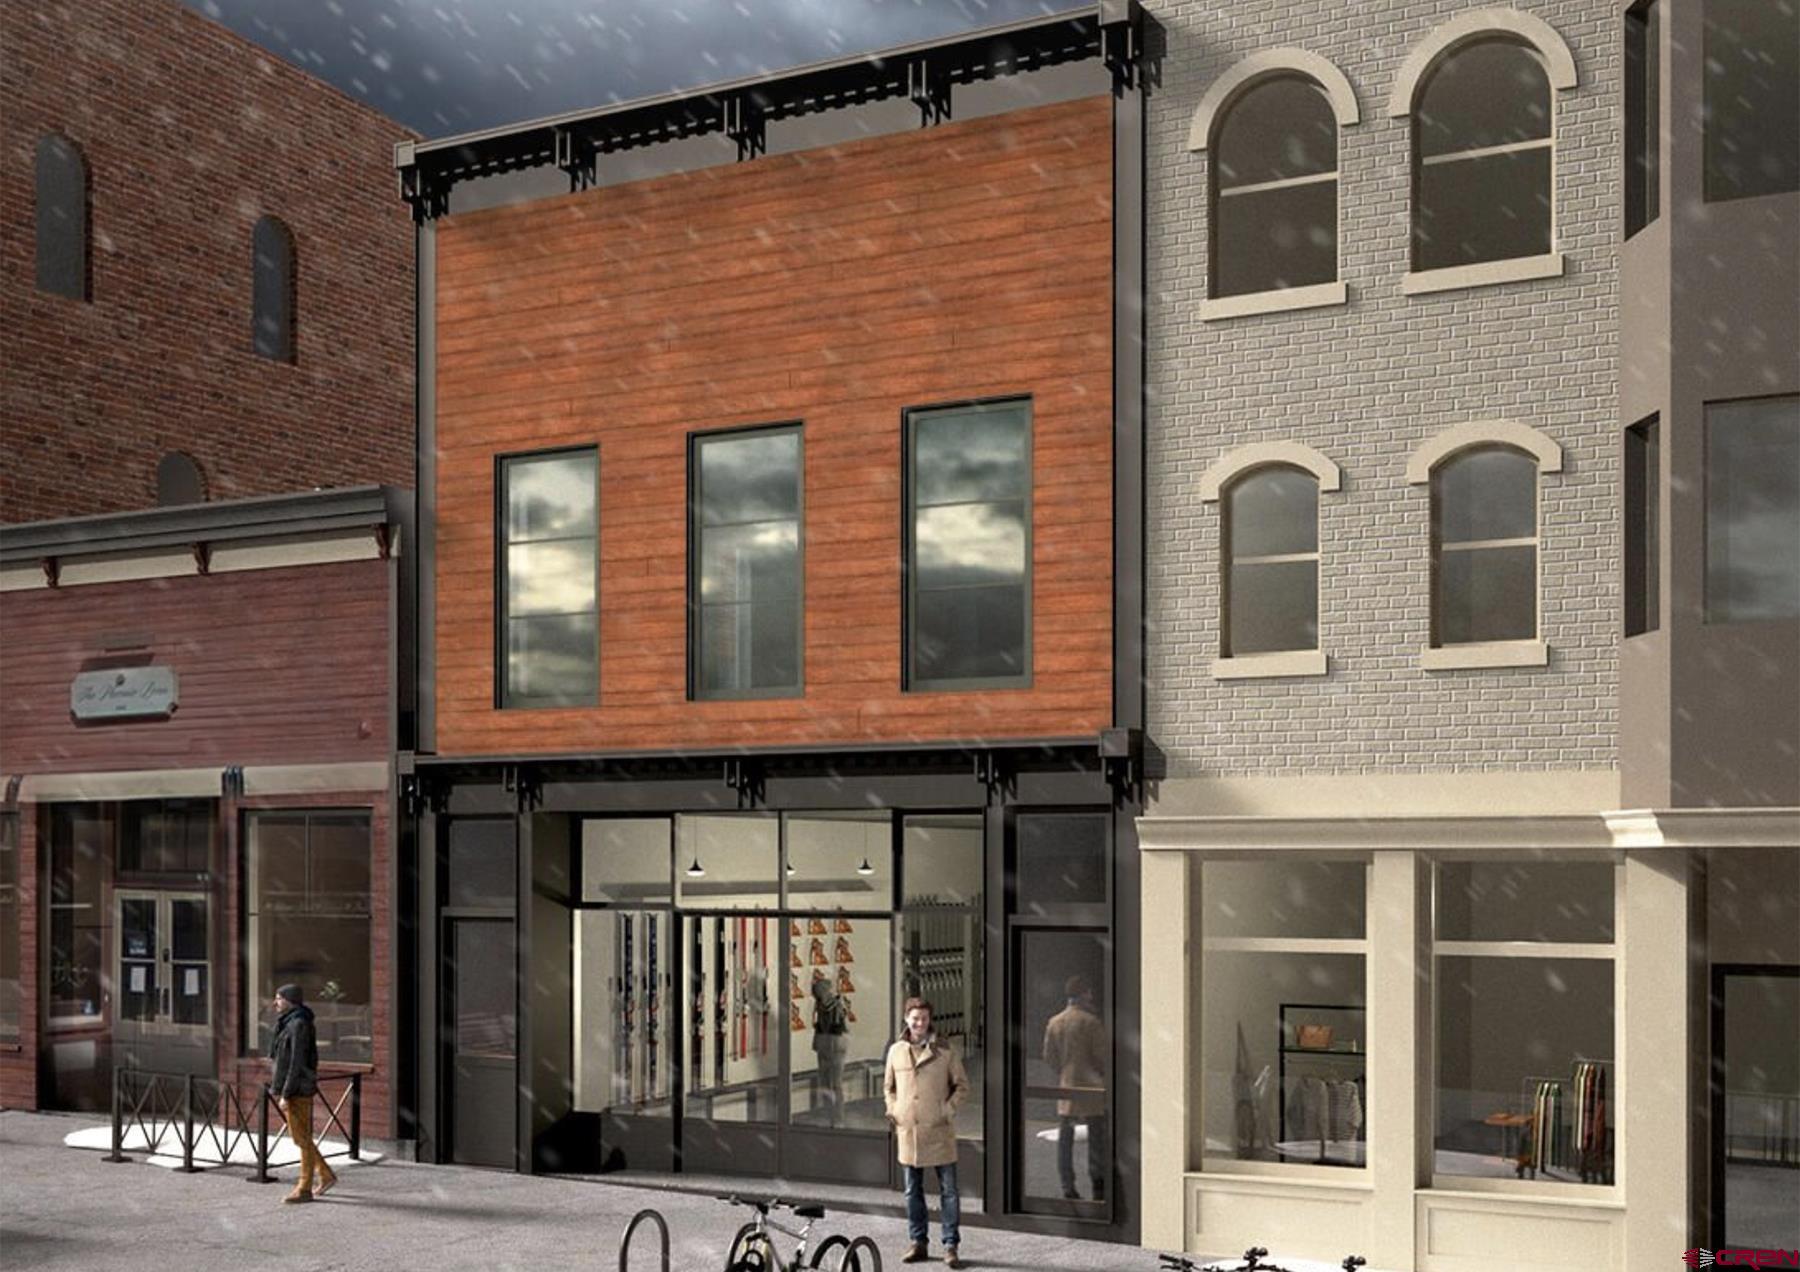 An extraordinary opportunity to purchase an iconic building in the most highly desired location on Main Street in downtown Telluride. The building currently comprises nearly 4,000 square feet of prime street-level commercial space and a three bedroom residence on the second level. Purchase of the property comes with fully approved HARC plans and complete construction drawings by Sante Architects for a full building remodel and expansion including the development of a 4,500 square foot penthouse with a stunning 800 square foot deck overlooking Main Street. This project is shovel ready.